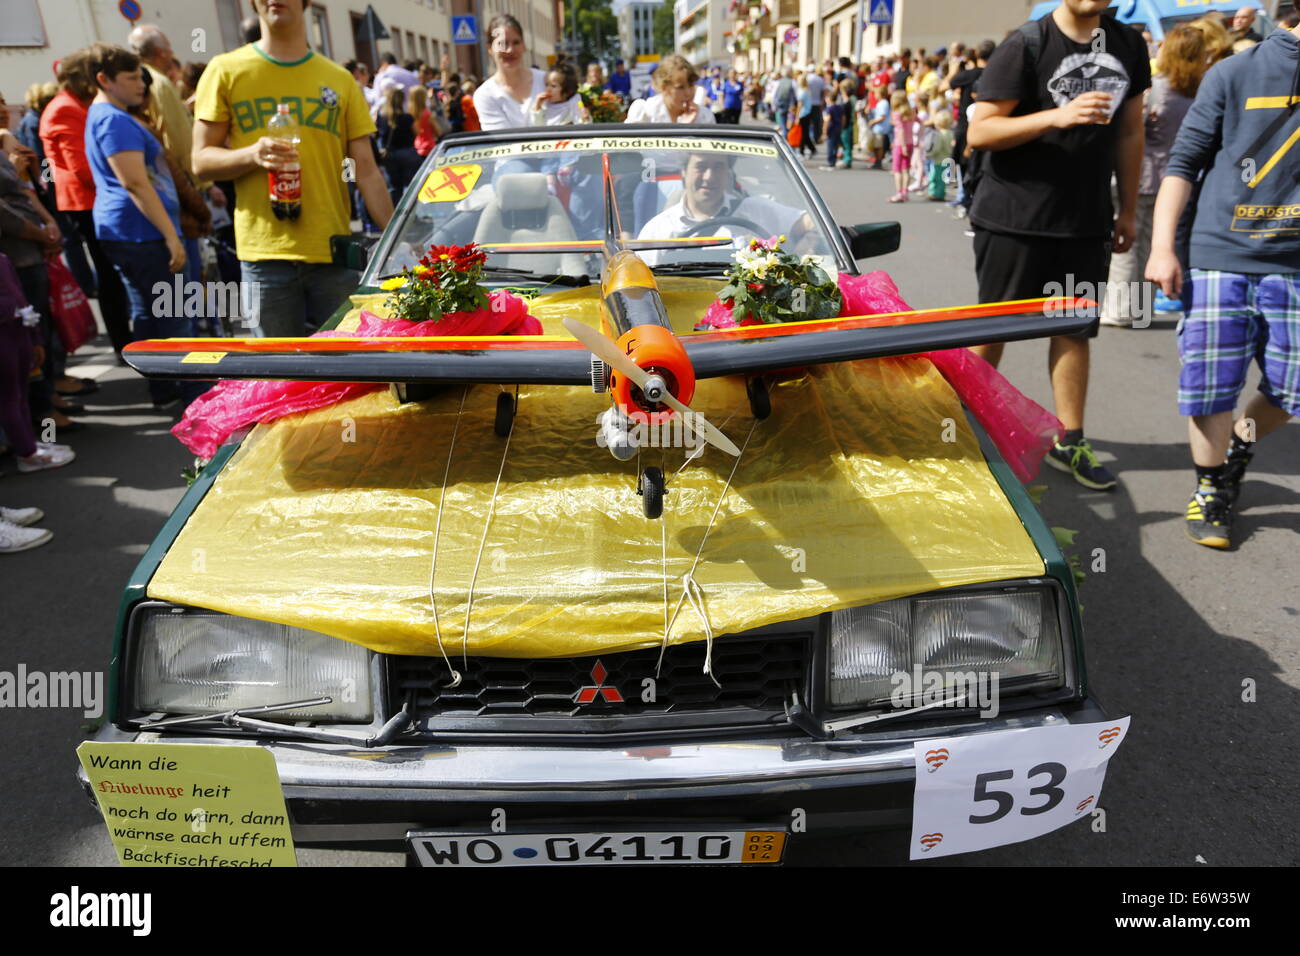 Worms, Germany. 31st August 2014. A model airplane is pictured on the bonnet of a car during the Backfischfest parade 2014.  The first highlight of this year's Backfischfest was the big parade through the city of Worms with 125 groups and floats. Community groups, sport clubs, music groups and business from Worms and further afield took part. Credit:  Michael Debets/Alamy Live News Stock Photo